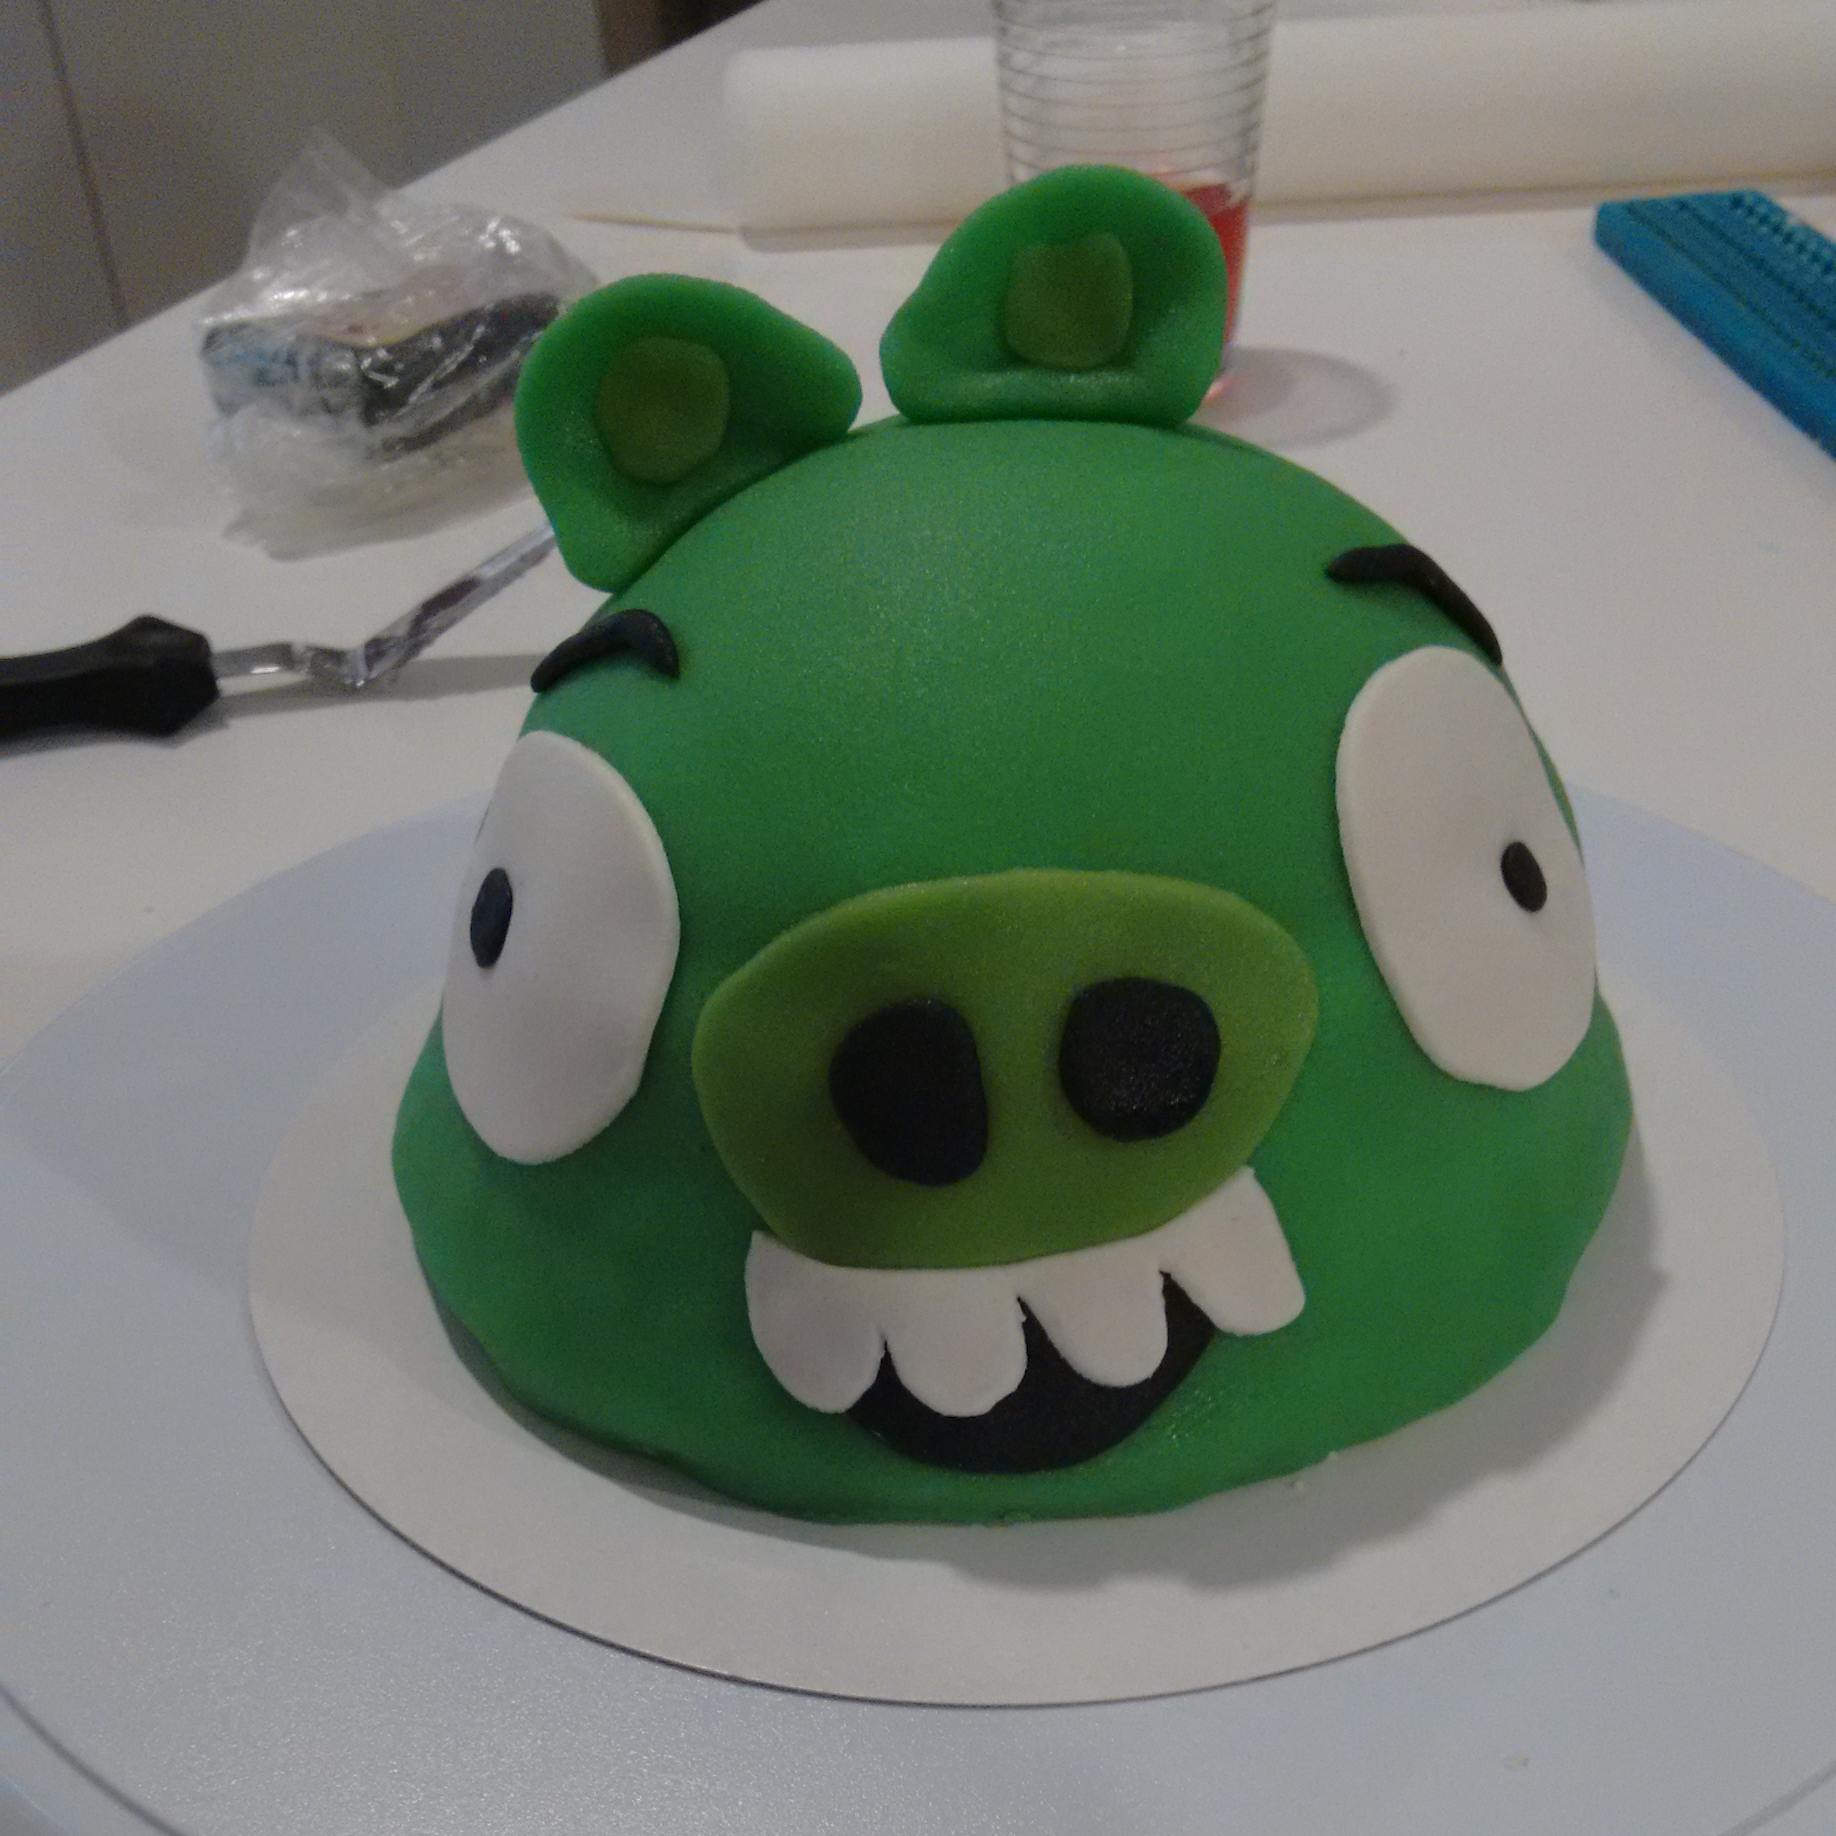 Angry birds Pig